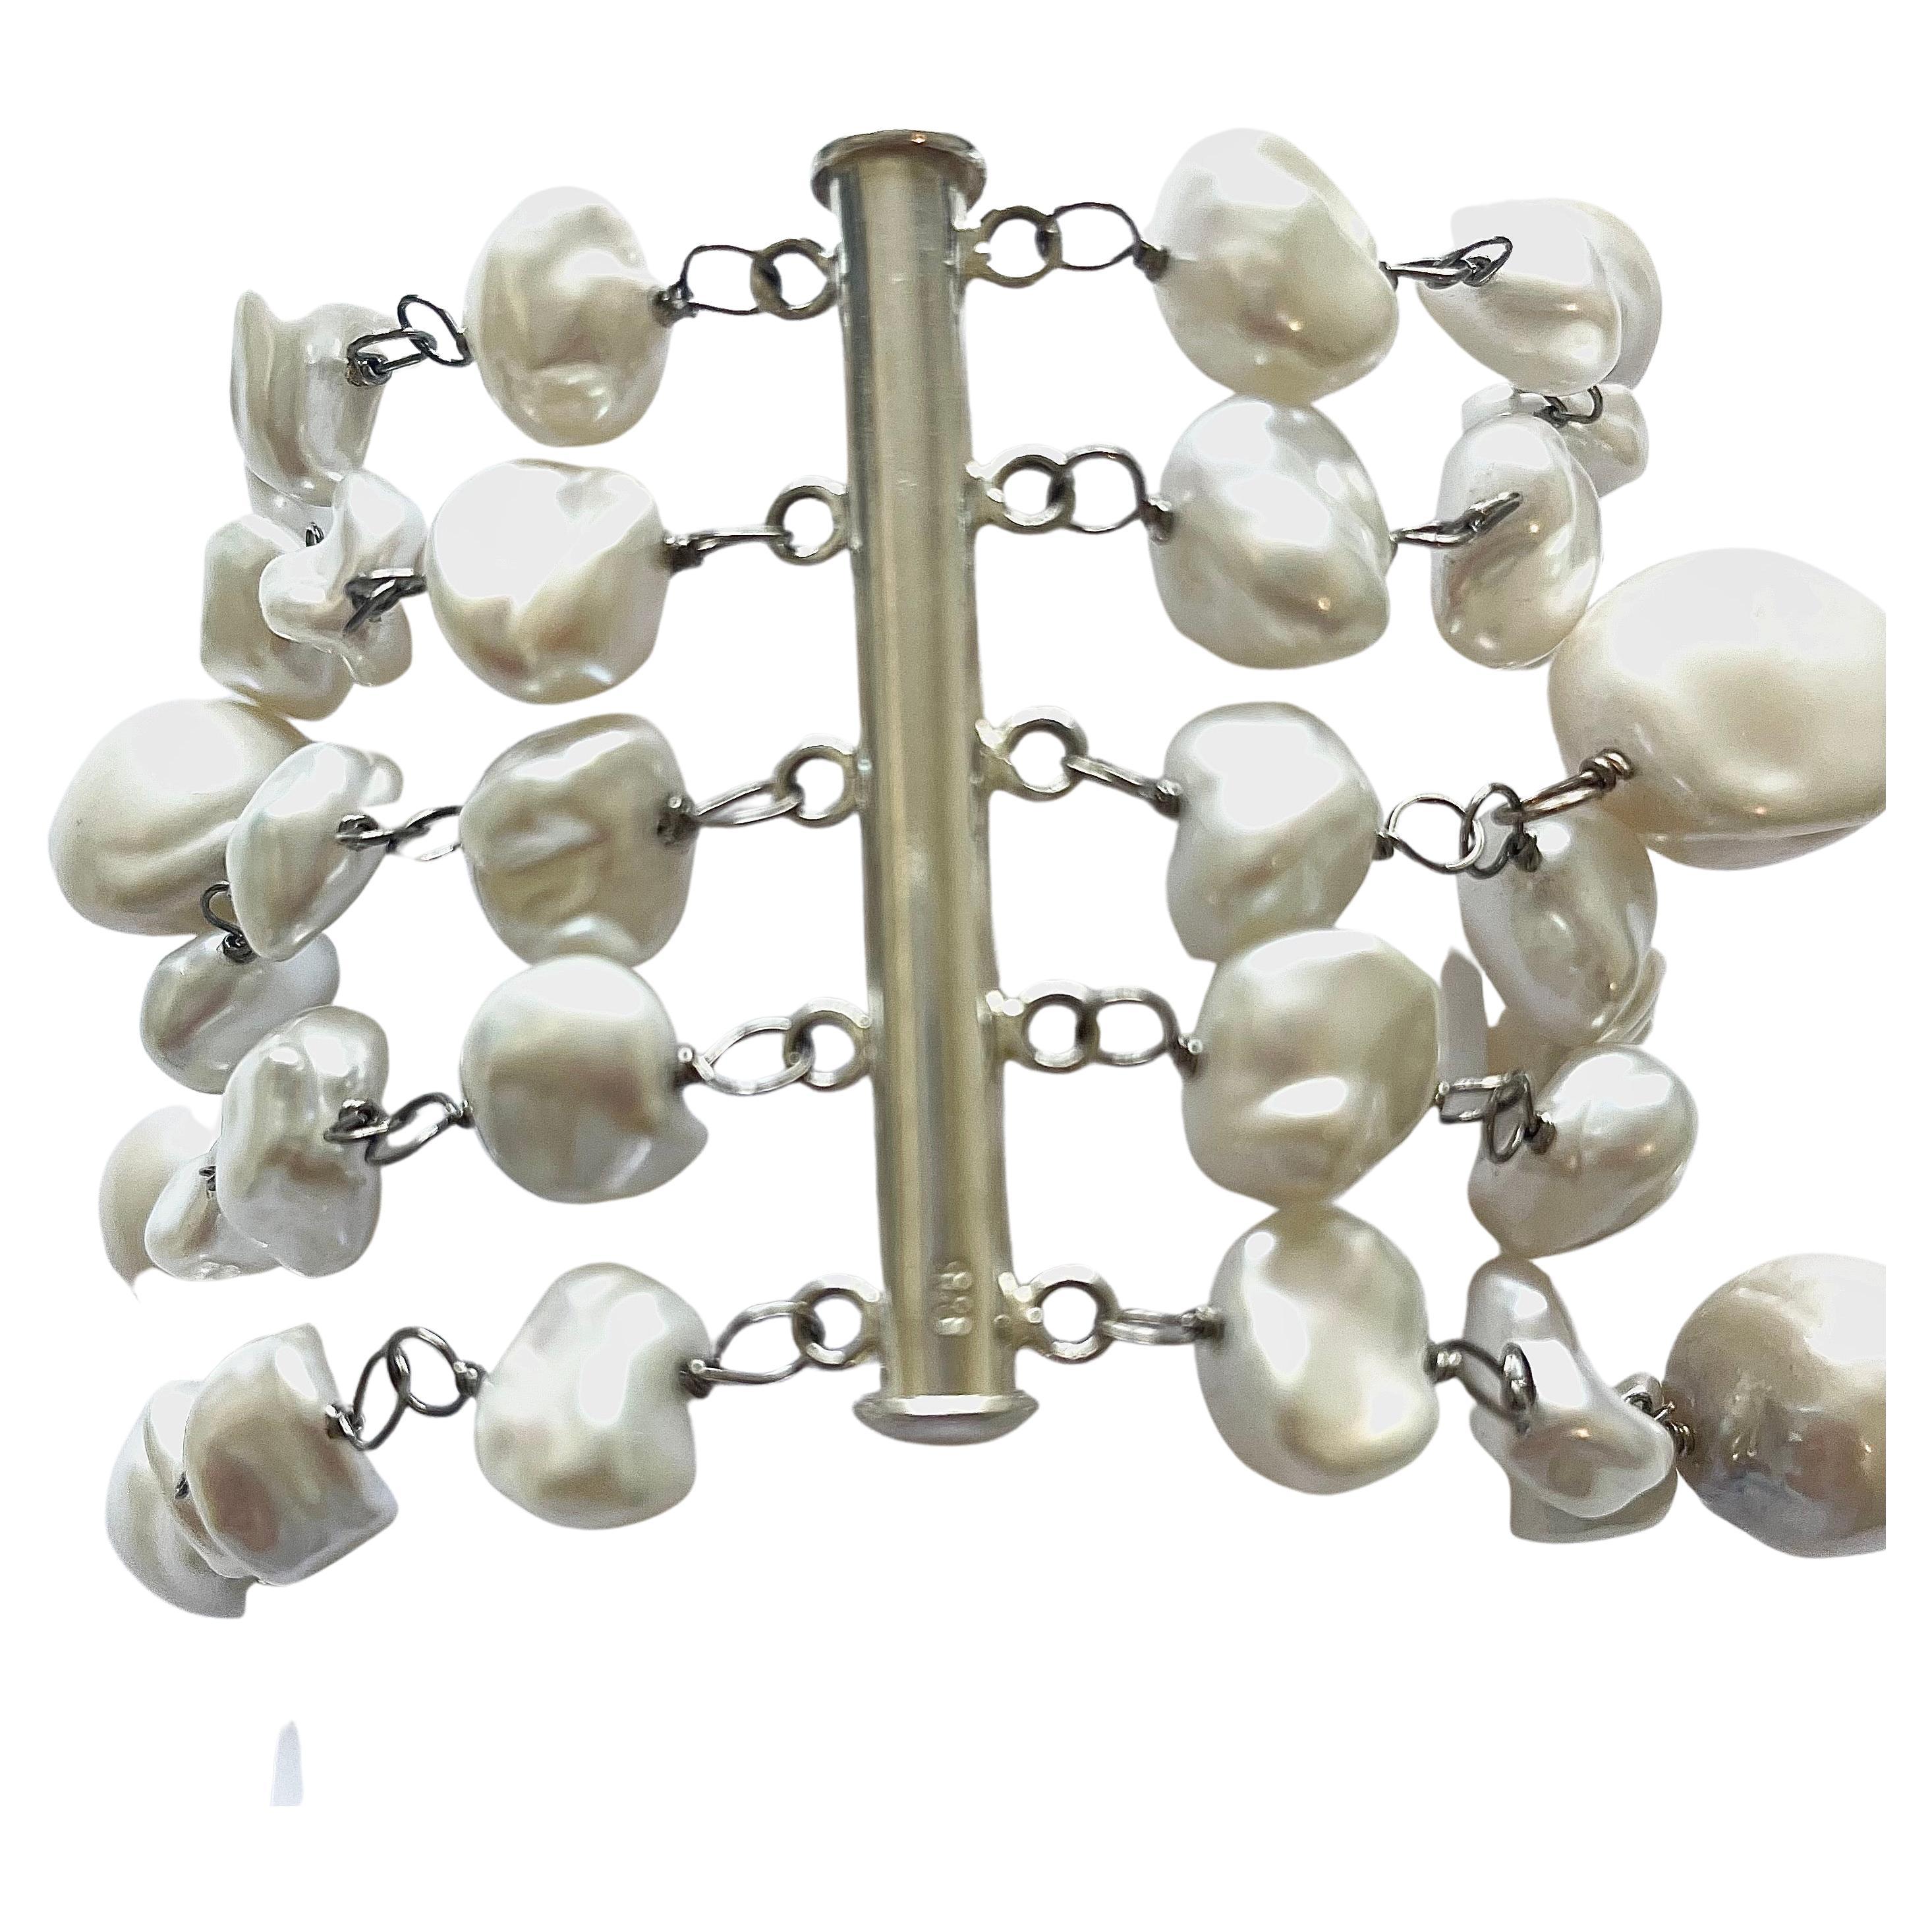 Description
White freshwater pearls. Five strand bracelet.         
Item # B1056

Materials and Weight
Freshwater Keshi pearls (55 pieces), 10mm.
Freshwater Baroque pearls (13 pieces), 13 to 15mm.
14k white gold with palladium.
Sterling silver